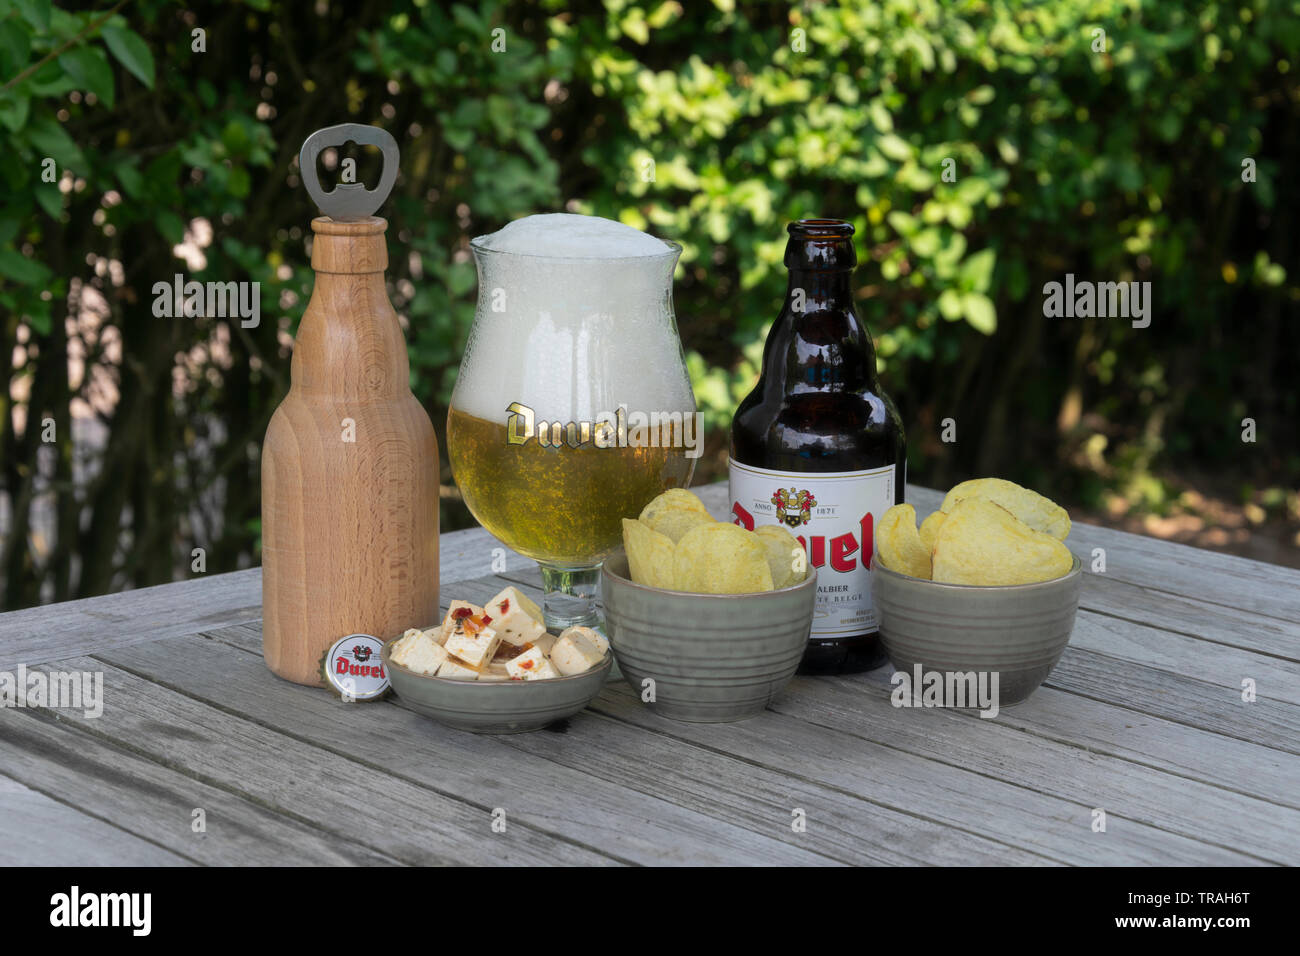 Sint Gillis Waas, Belgium - july 22, 2018: Duvel, Belgium beer feta cheese and salted chips and a wooden bottle opener in the form of a bottle of duve Stock Photo